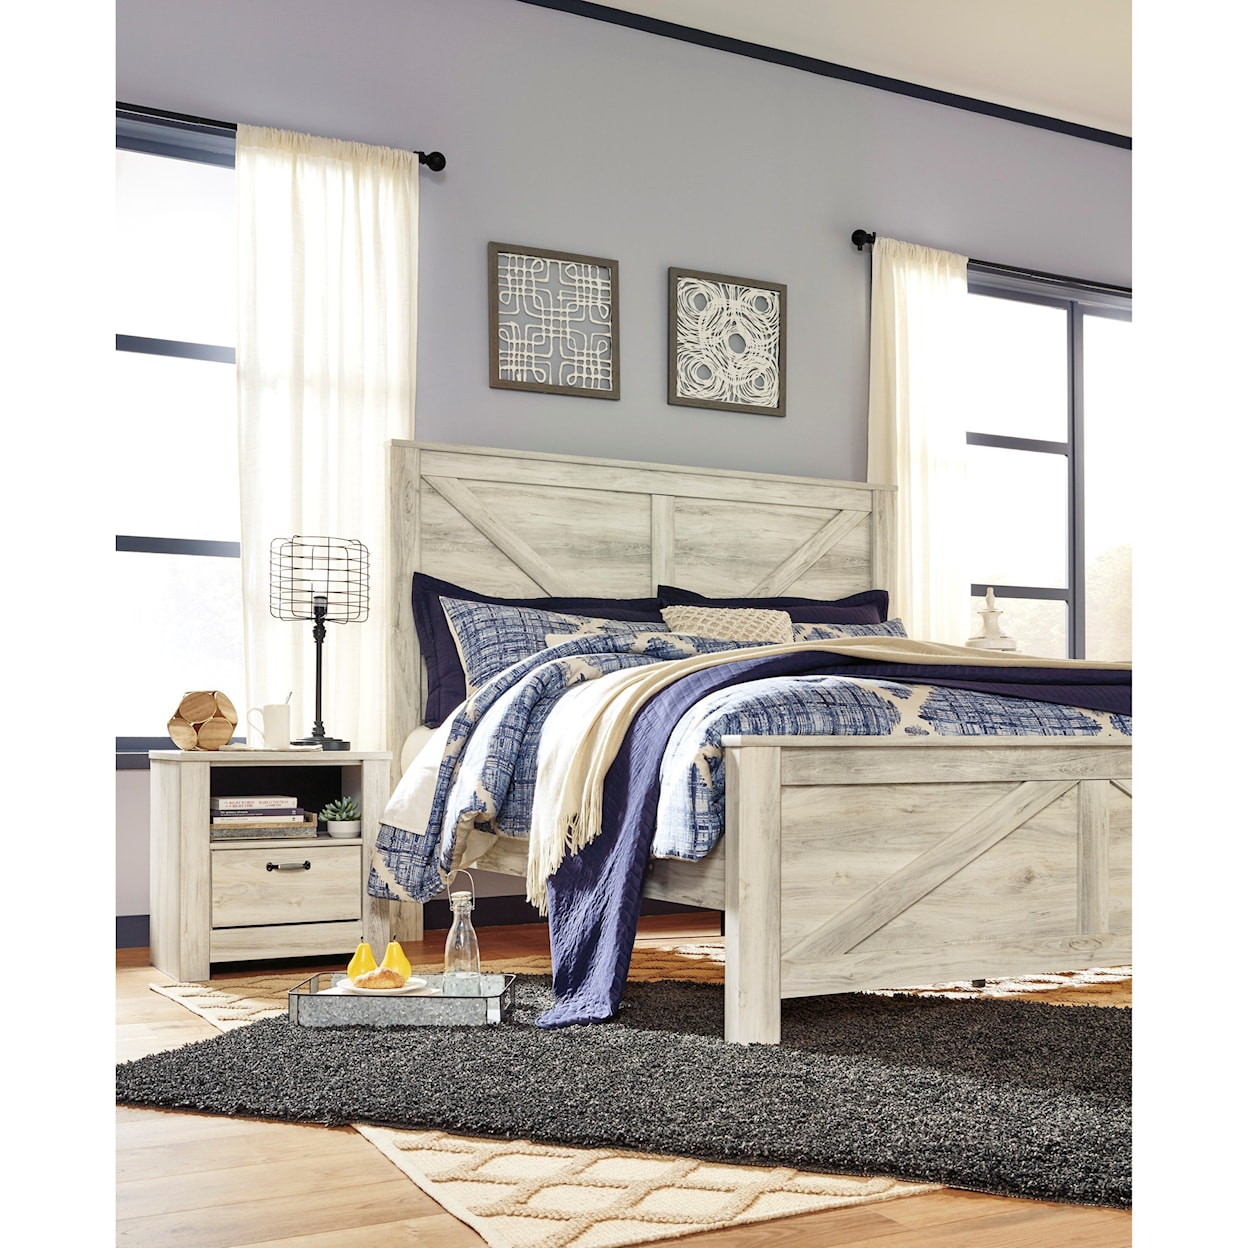 Signature Design by Ashley Bellaby King Panel Bed